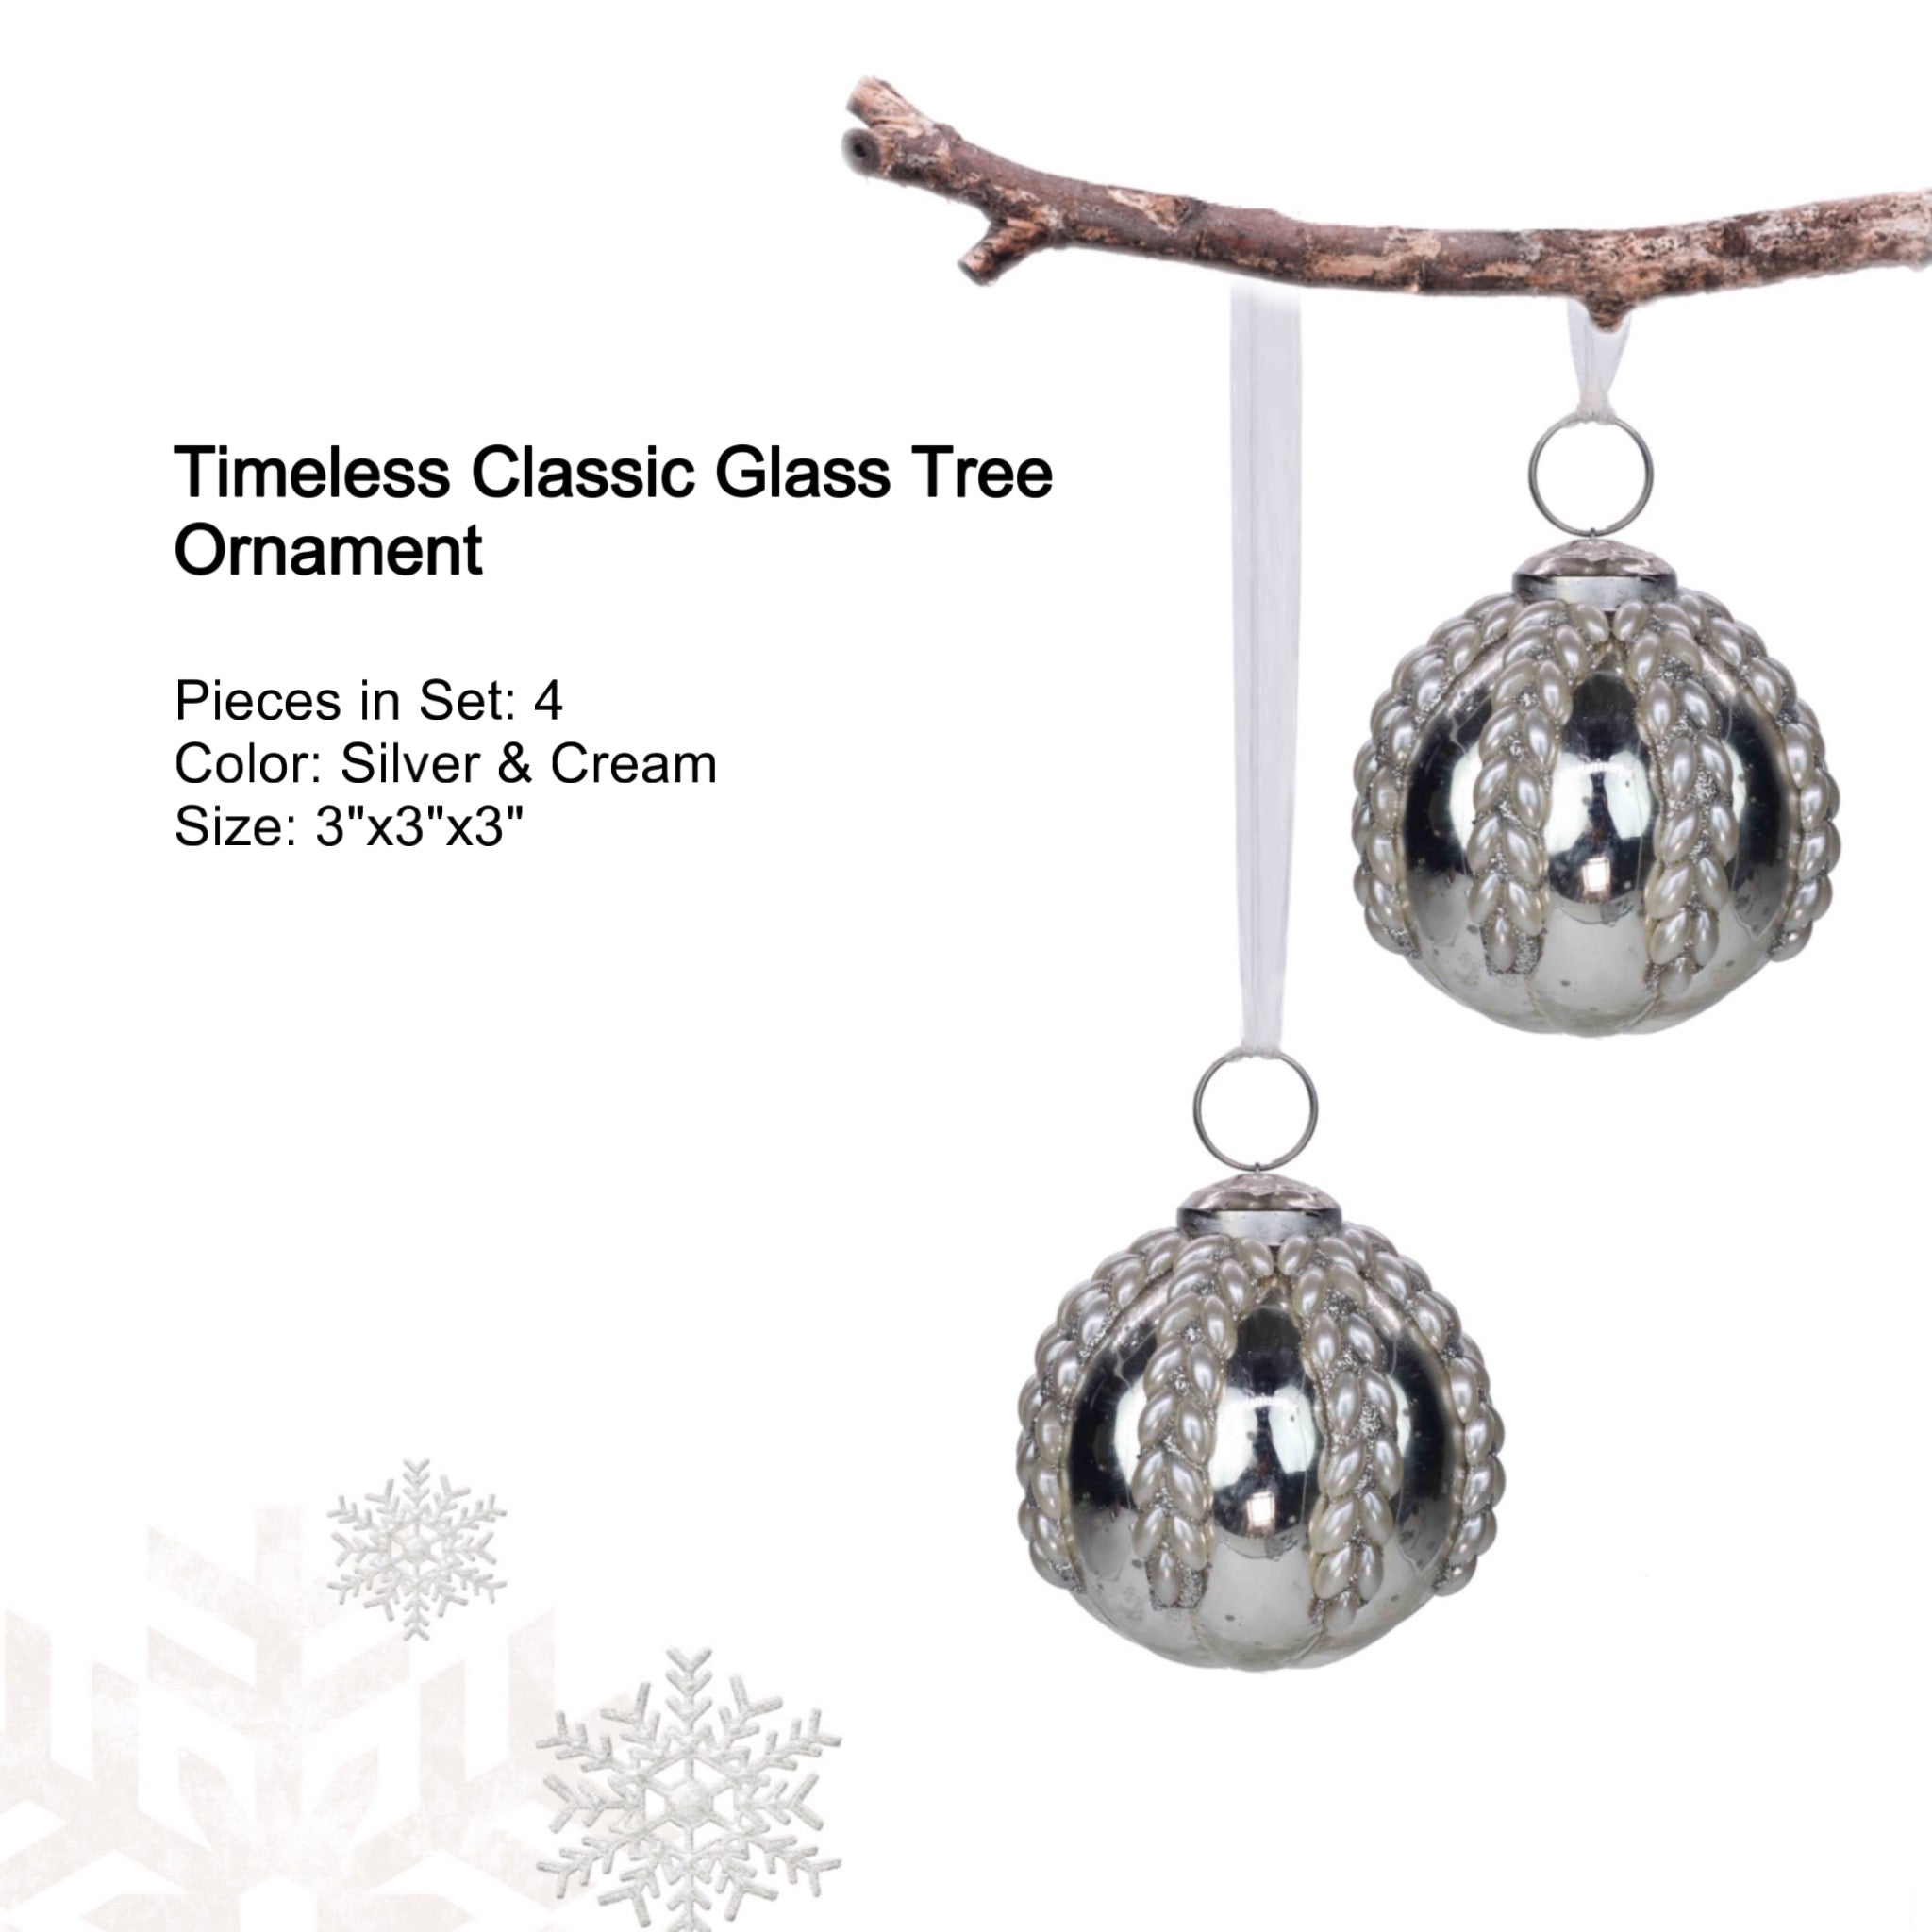 Timeless Classic Glass Tree Ornament in Silver & Cream, Boxed Set of 4